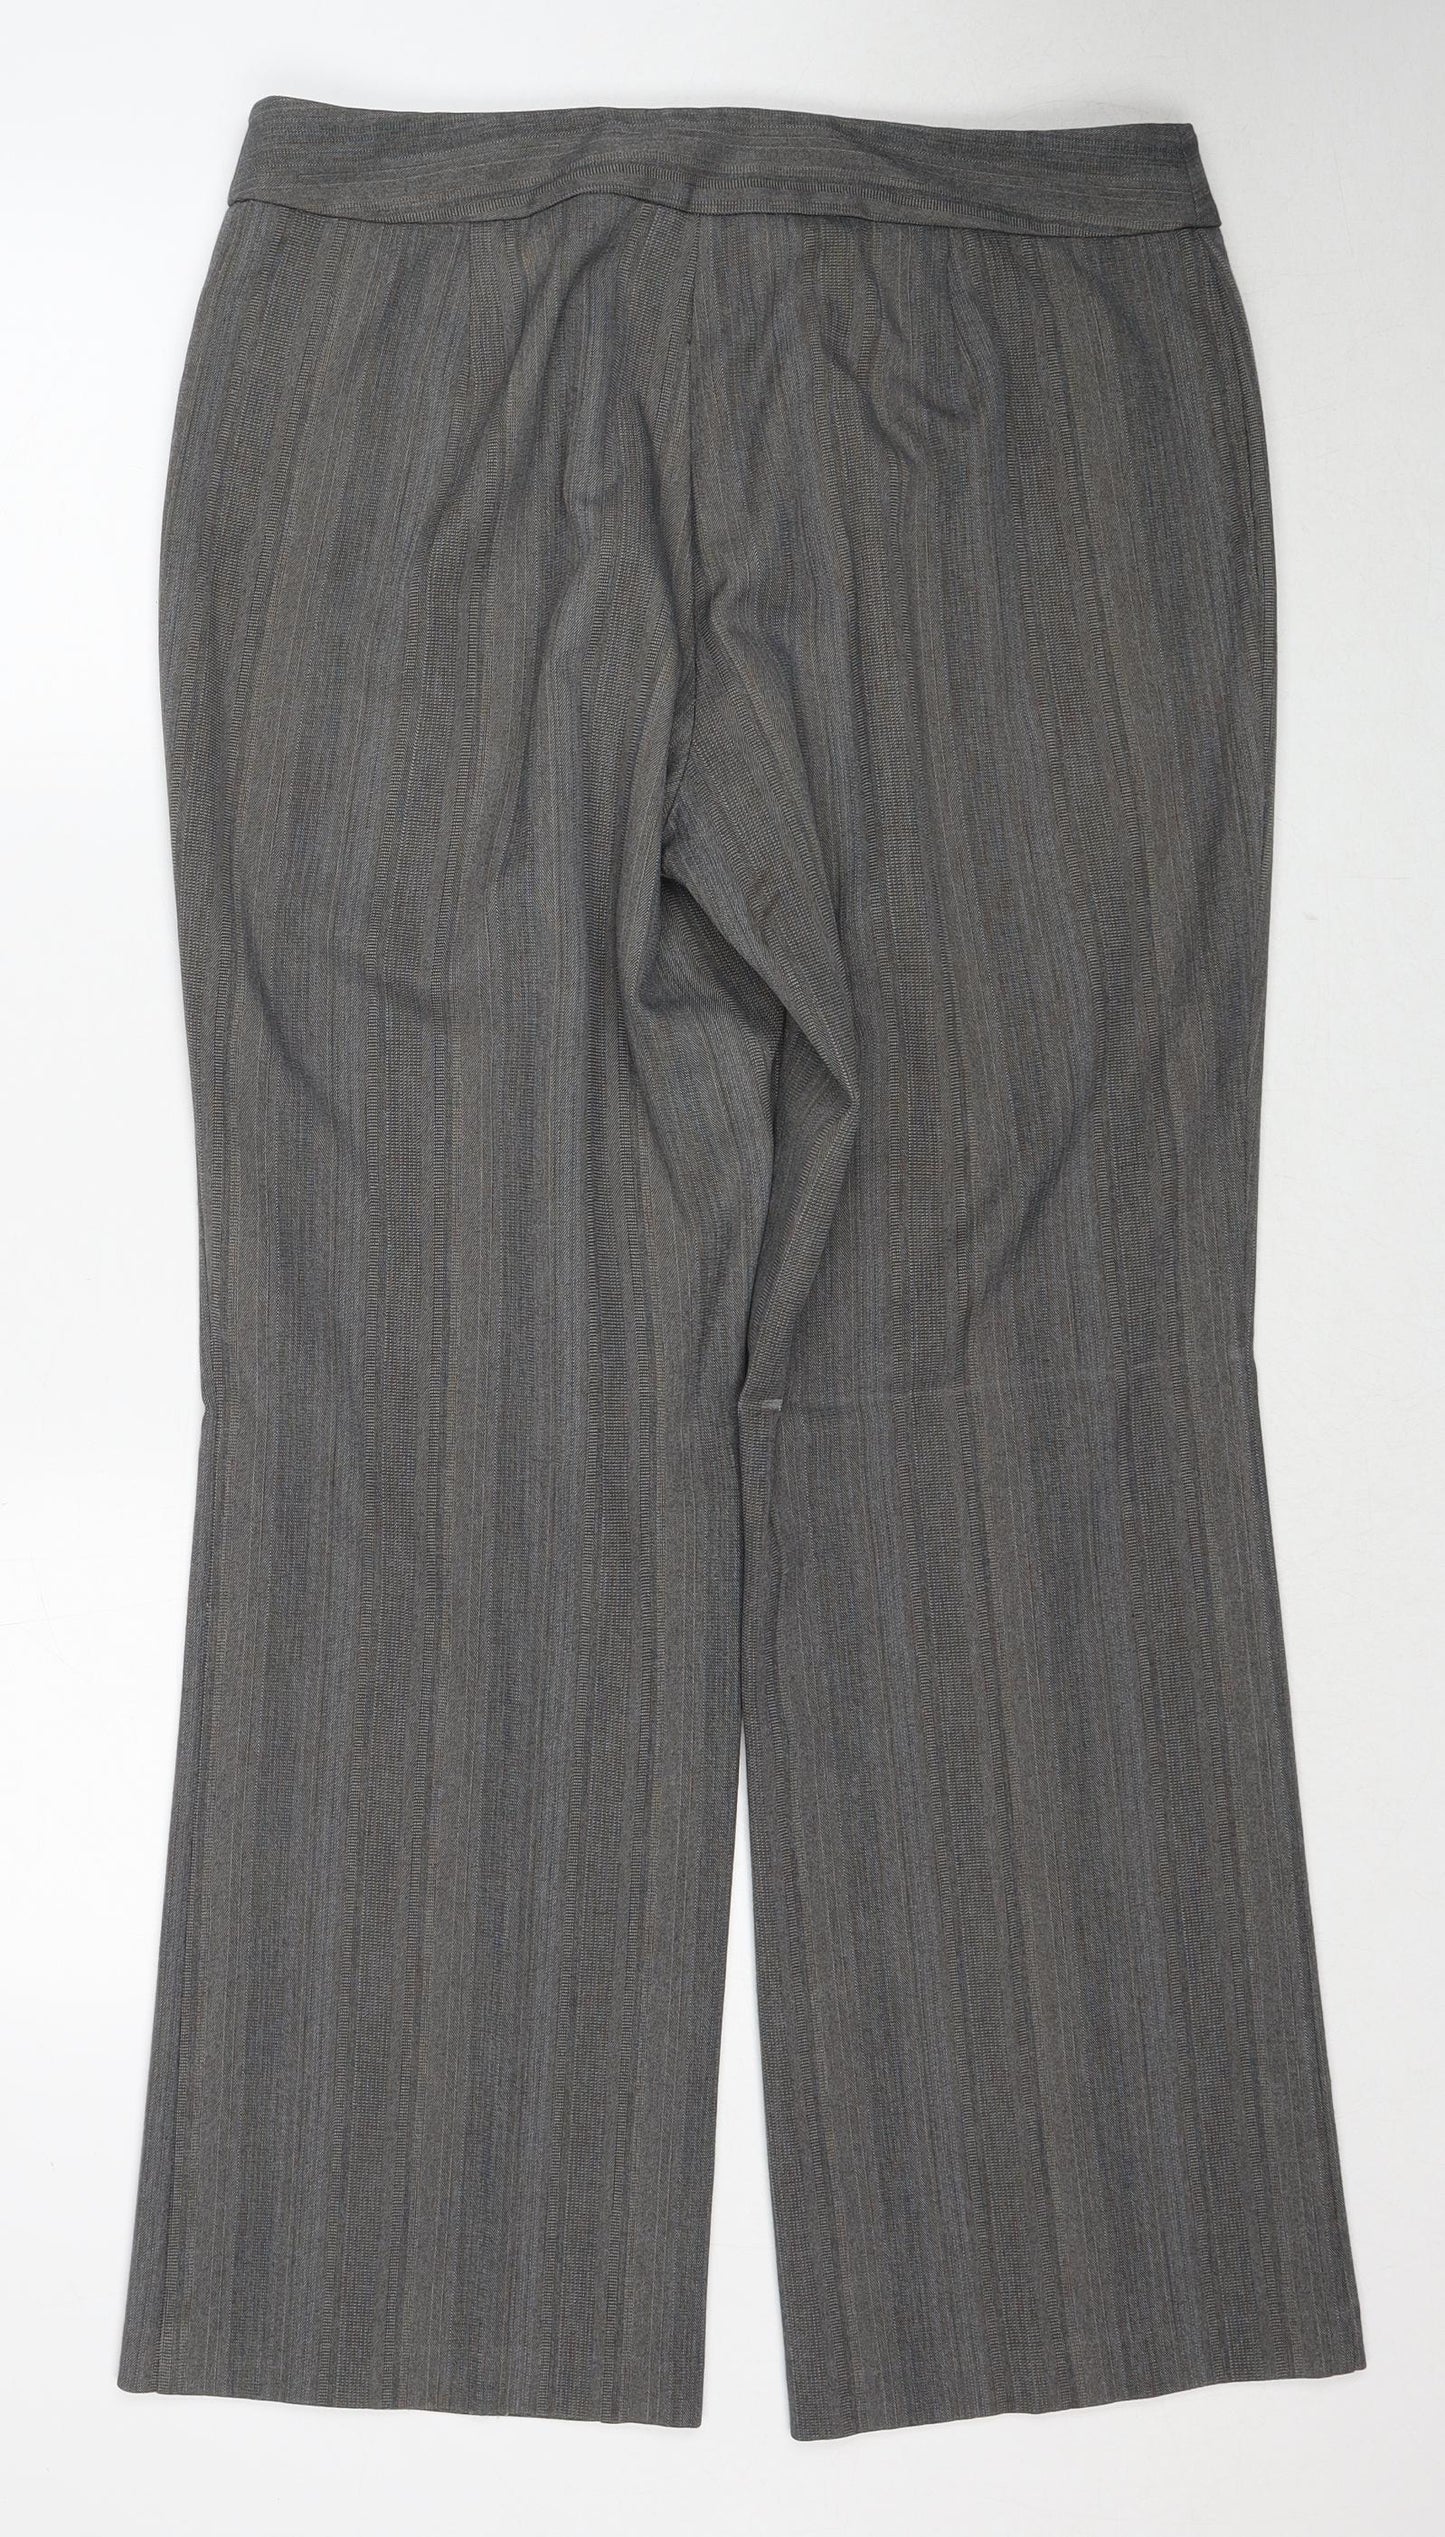 Marks and Spencer Womens Grey Striped Polyester Trousers Size 16 Regular Zip